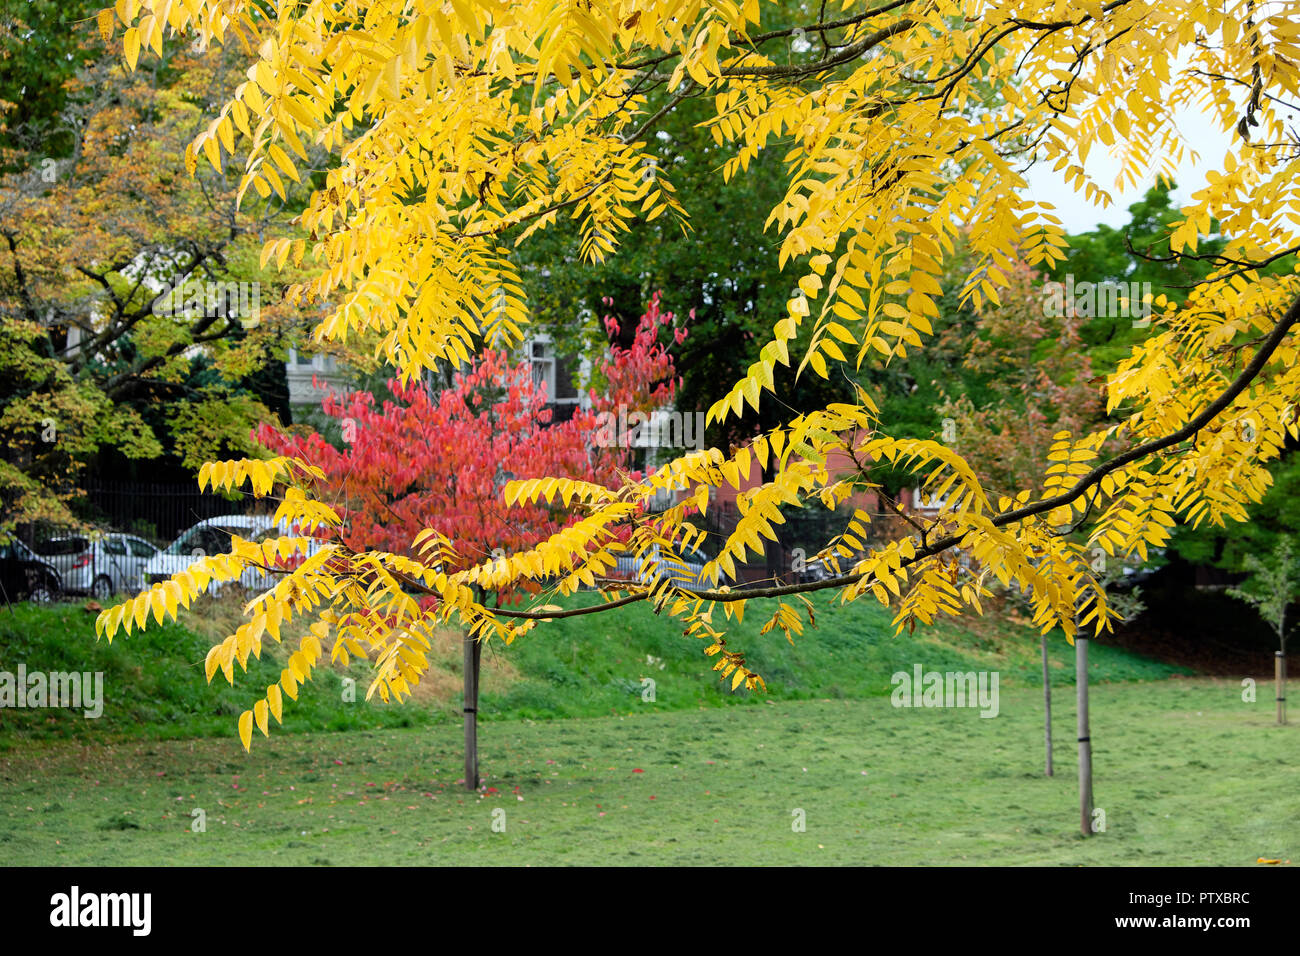 Sumach tree and Rhus typhina trees in Roath Park public garden park in October autumn, Cardiff Wales UK Great Britain  KATHY DEWITT Stock Photo